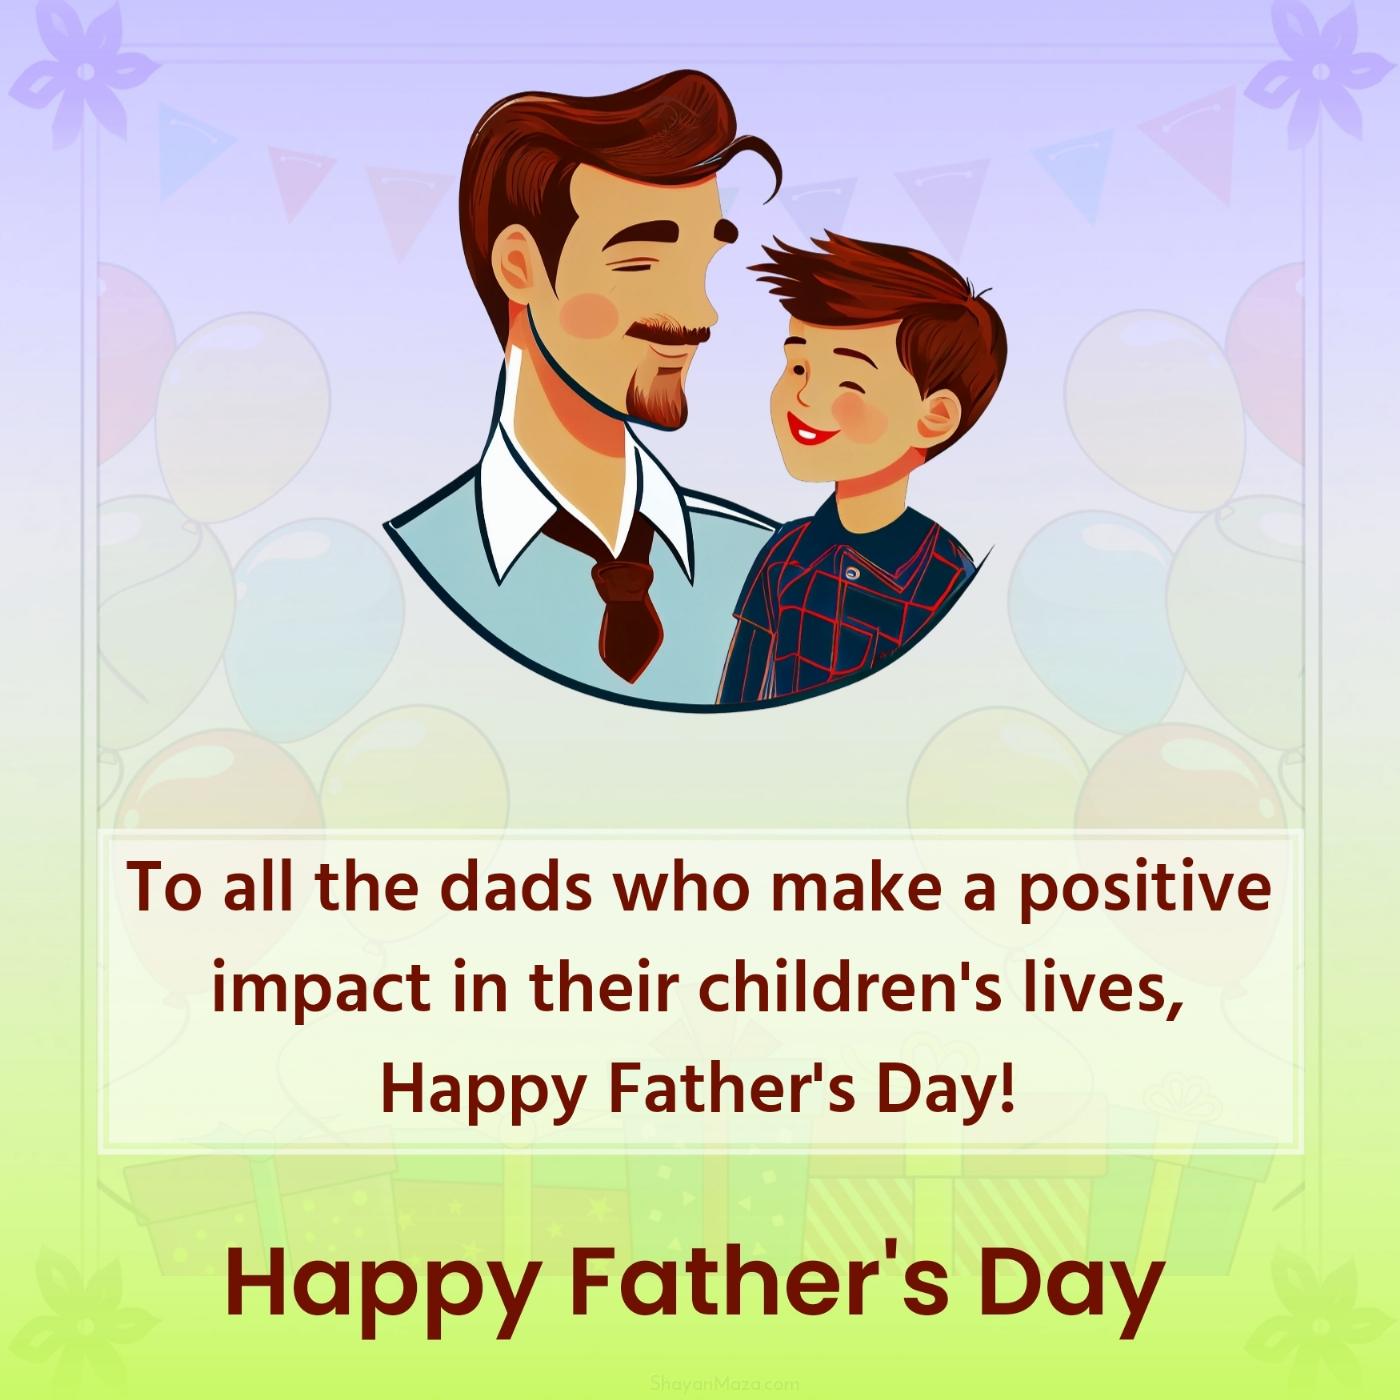 To all the dads who make a positive impact in their children's lives